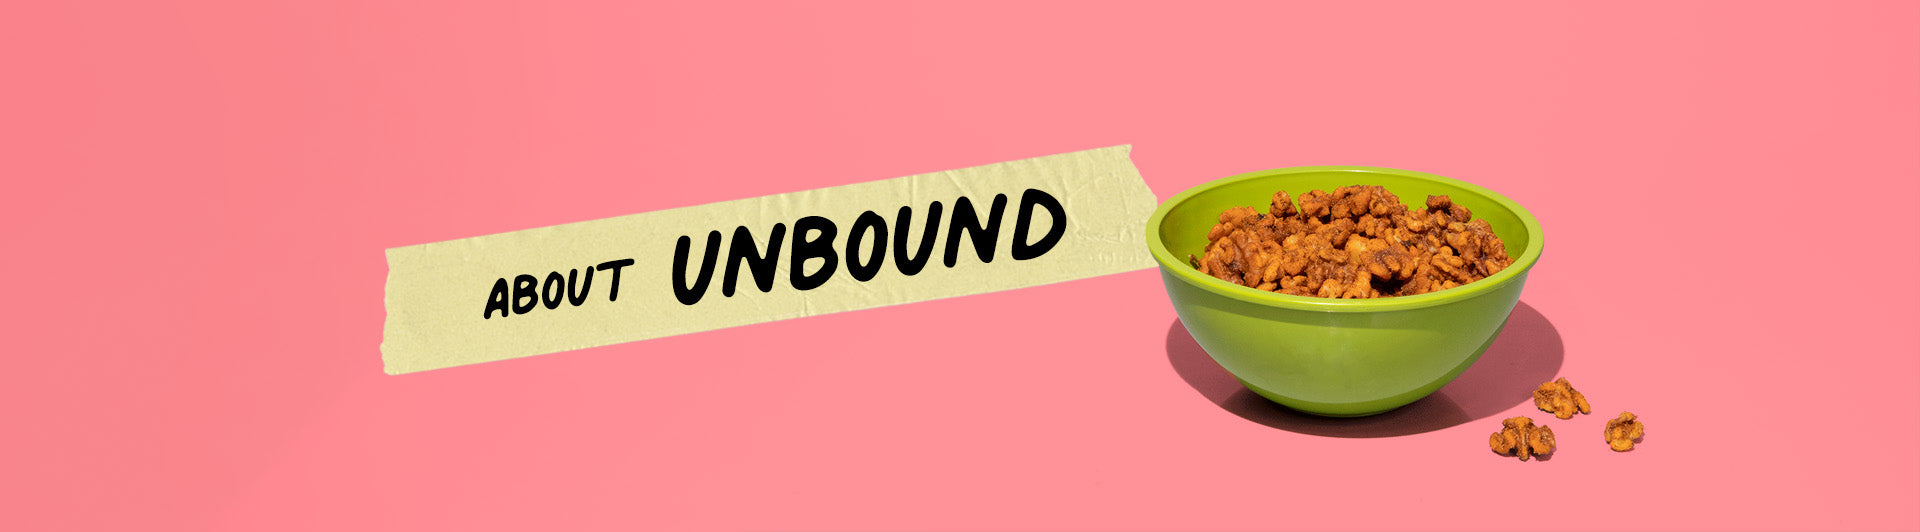 Bowl of walnuts on pink background with 'About Unbound' banner